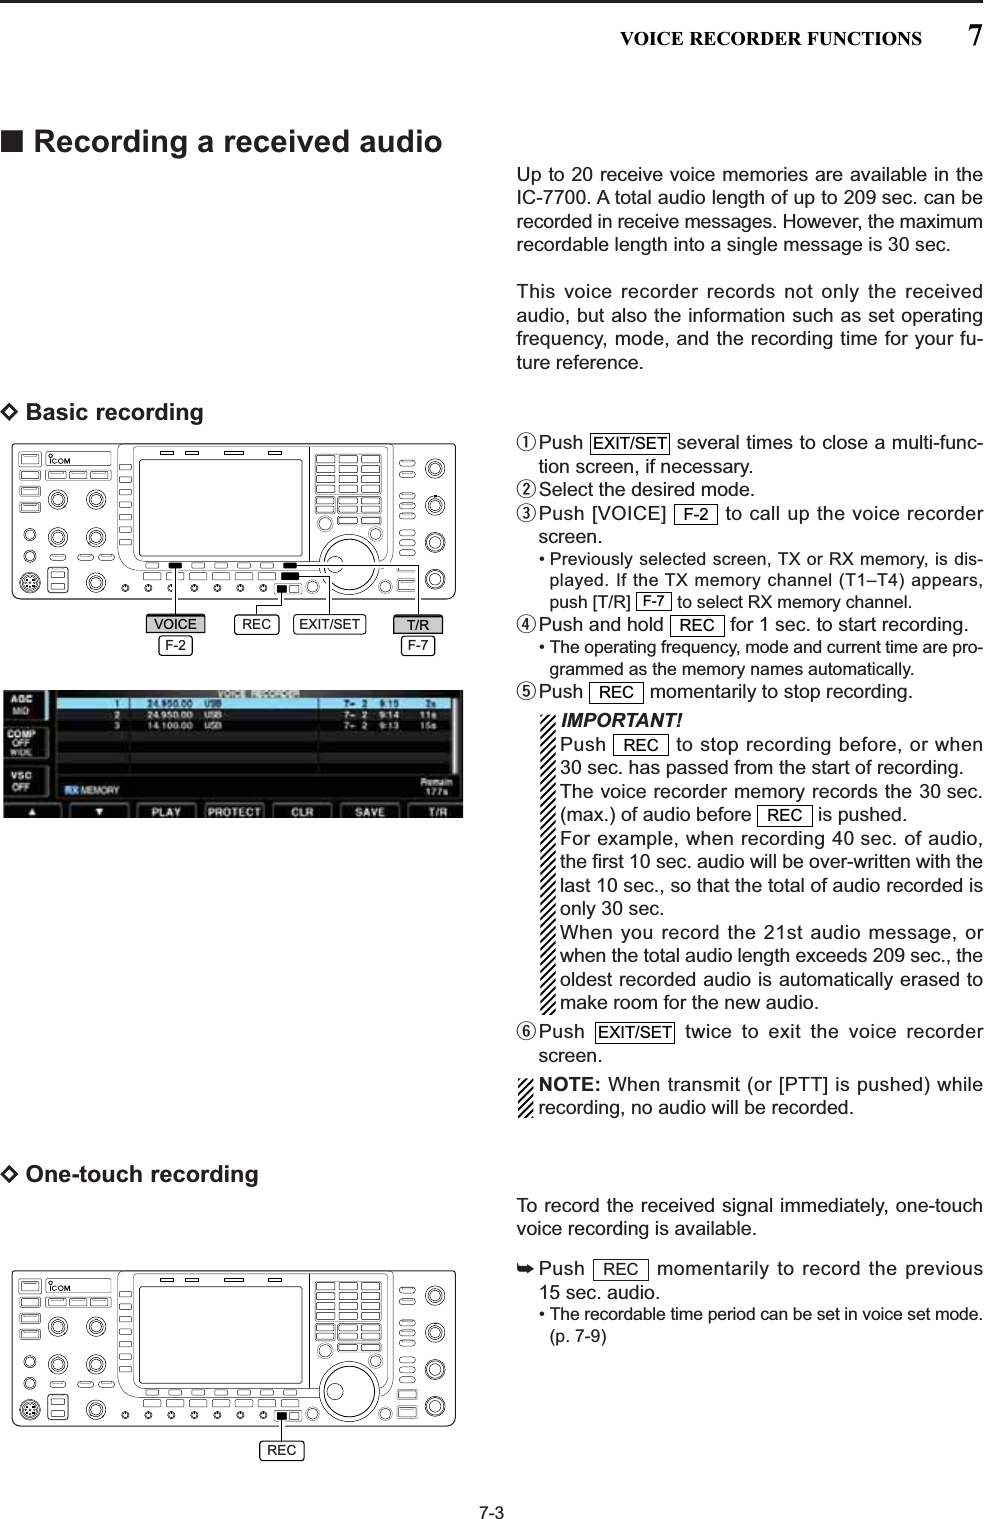 7-3■Recording a received audioUp to 20 receive voice memories are available in theIC-7700. A total audio length of up to 209 sec. can berecorded in receive messages. However, the maximumrecordable length into a single message is 30 sec. This voice recorder records not only the receivedaudio, but also the information such as set operatingfrequency, mode, and the recording time for your fu-ture reference.DBasic recordingqPush  several times to close a multi-func-tion screen, if necessary.wSelect the desired mode.ePush [VOICE]  to call up the voice recorderscreen.• Previously selected screen, TX or RX memory, is dis-played. If the TX memory channel (T1–T4) appears,push [T/R]  to select RX memory channel.rPush and hold  for 1 sec. to start recording.• The operating frequency, mode and current time are pro-grammed as the memory names automatically.tPush  momentarily to stop recording.IMPORTANT!Push  to stop recording before, or when30 sec. has passed from the start of recording.The voice recorder memory records the 30 sec.(max.) of audio before  is pushed.For example, when recording 40 sec. of audio,the first 10 sec. audio will be over-written with thelast 10 sec., so that the total of audio recorded isonly 30 sec.When you record the 21st audio message, orwhen the total audio length exceeds 209 sec., theoldest recorded audio is automatically erased tomake room for the new audio.yPush  twice to exit the voice recorderscreen.NOTE: When transmit (or [PTT] is pushed) whilerecording, no audio will be recorded.DOne-touch recordingTo record the received signal immediately, one-touchvoice recording is available.➥Push  momentarily to record the previous15 sec. audio.• The recordable time period can be set in voice set mode.(p. 7-9)RECEXIT/SETRECRECRECRECF-7F-2EXIT/SETEXIT/SETRECF-7T/RF-2VOICEREC7VOICE RECORDER FUNCTIONS